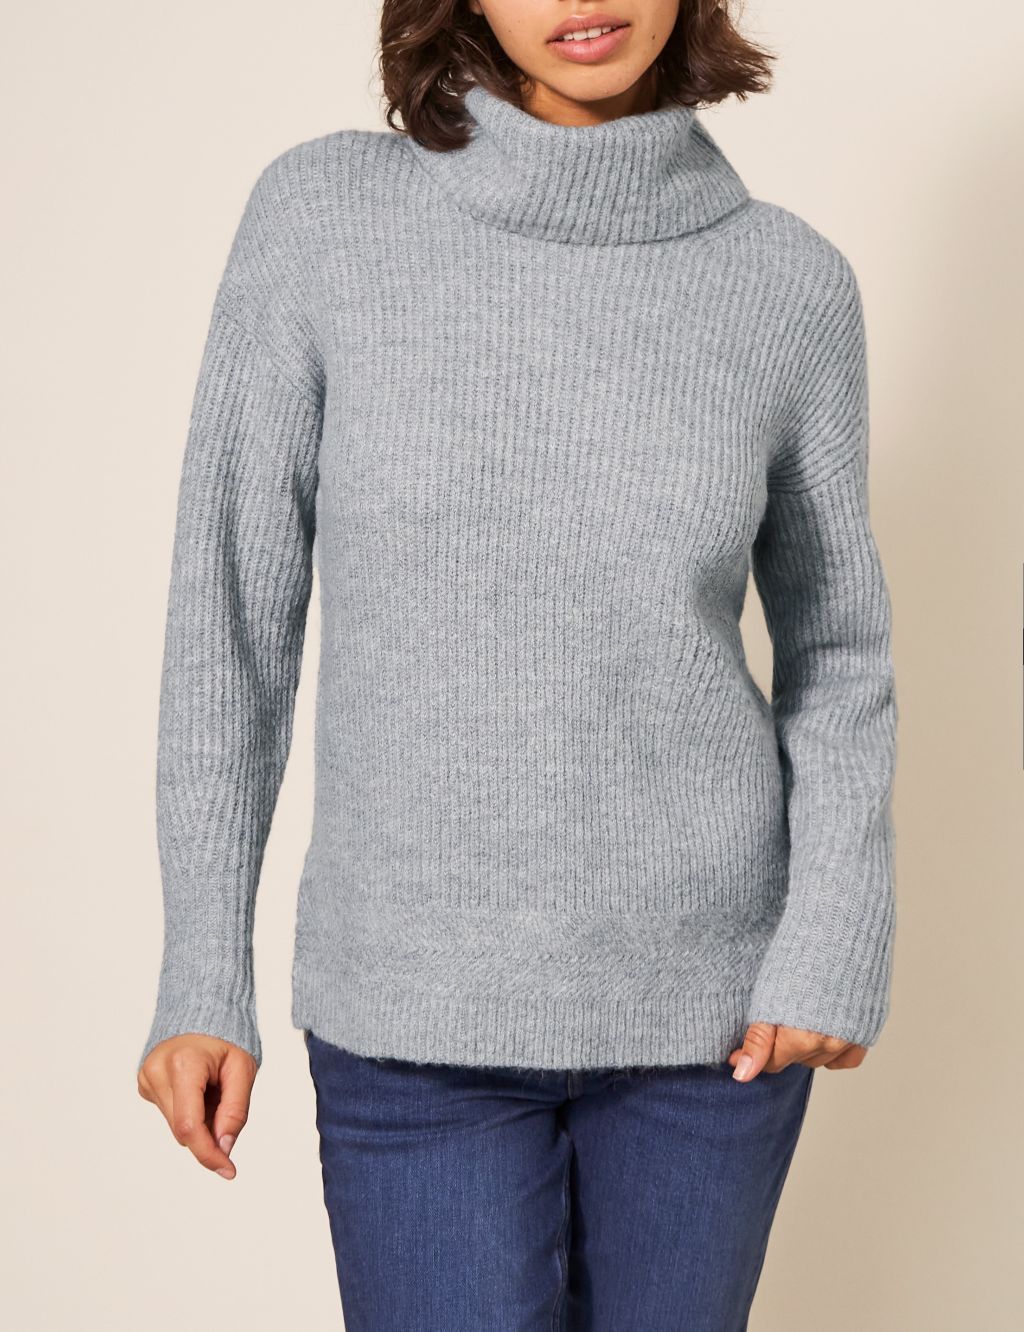 Ribbed Roll Neck Jumper with Wool image 2